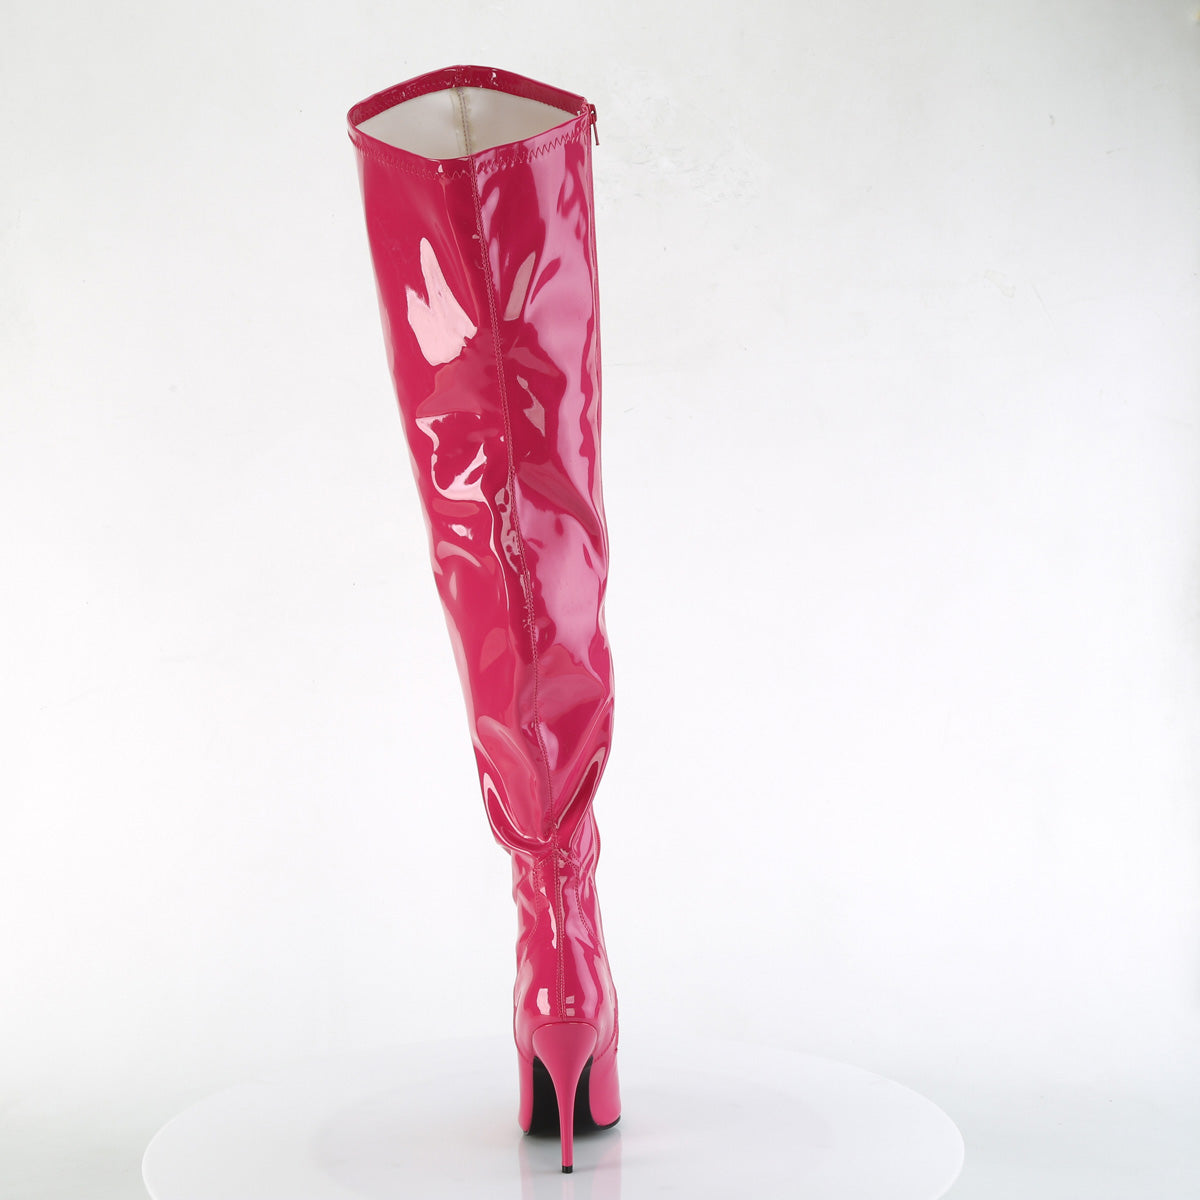 SEDUCE-3000WC Hot Pink Wide Calf Pleaser Sexy Thigh High Boots